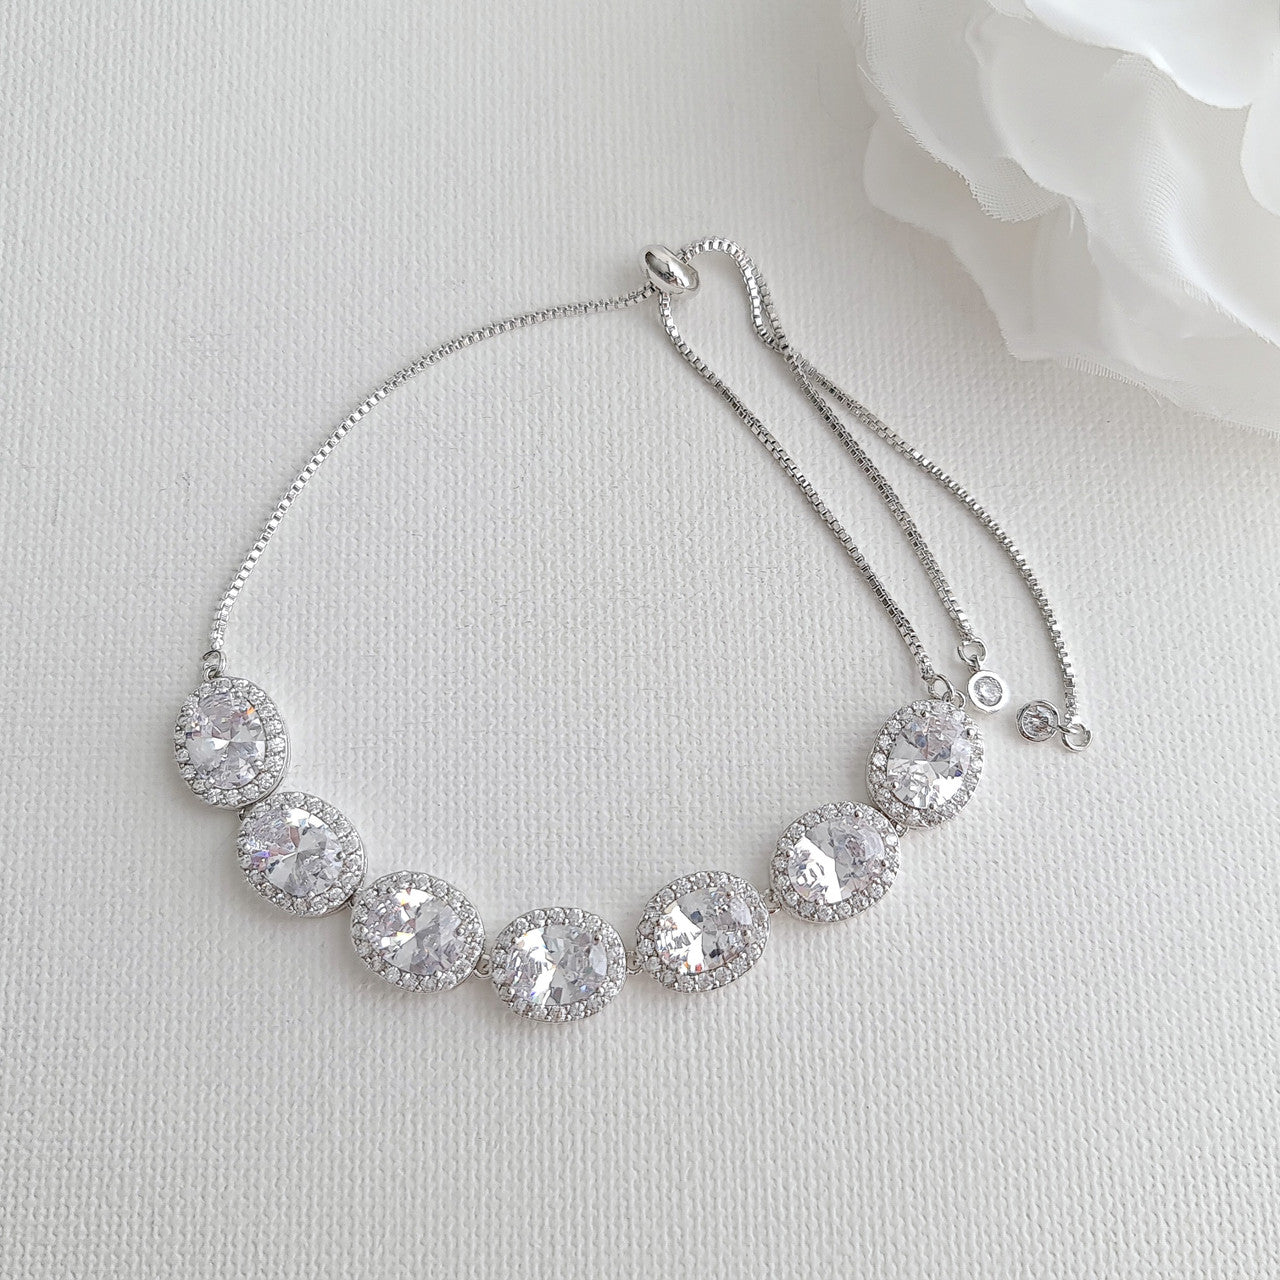 Silver and Crystal Bracelet for Weddings- Emily